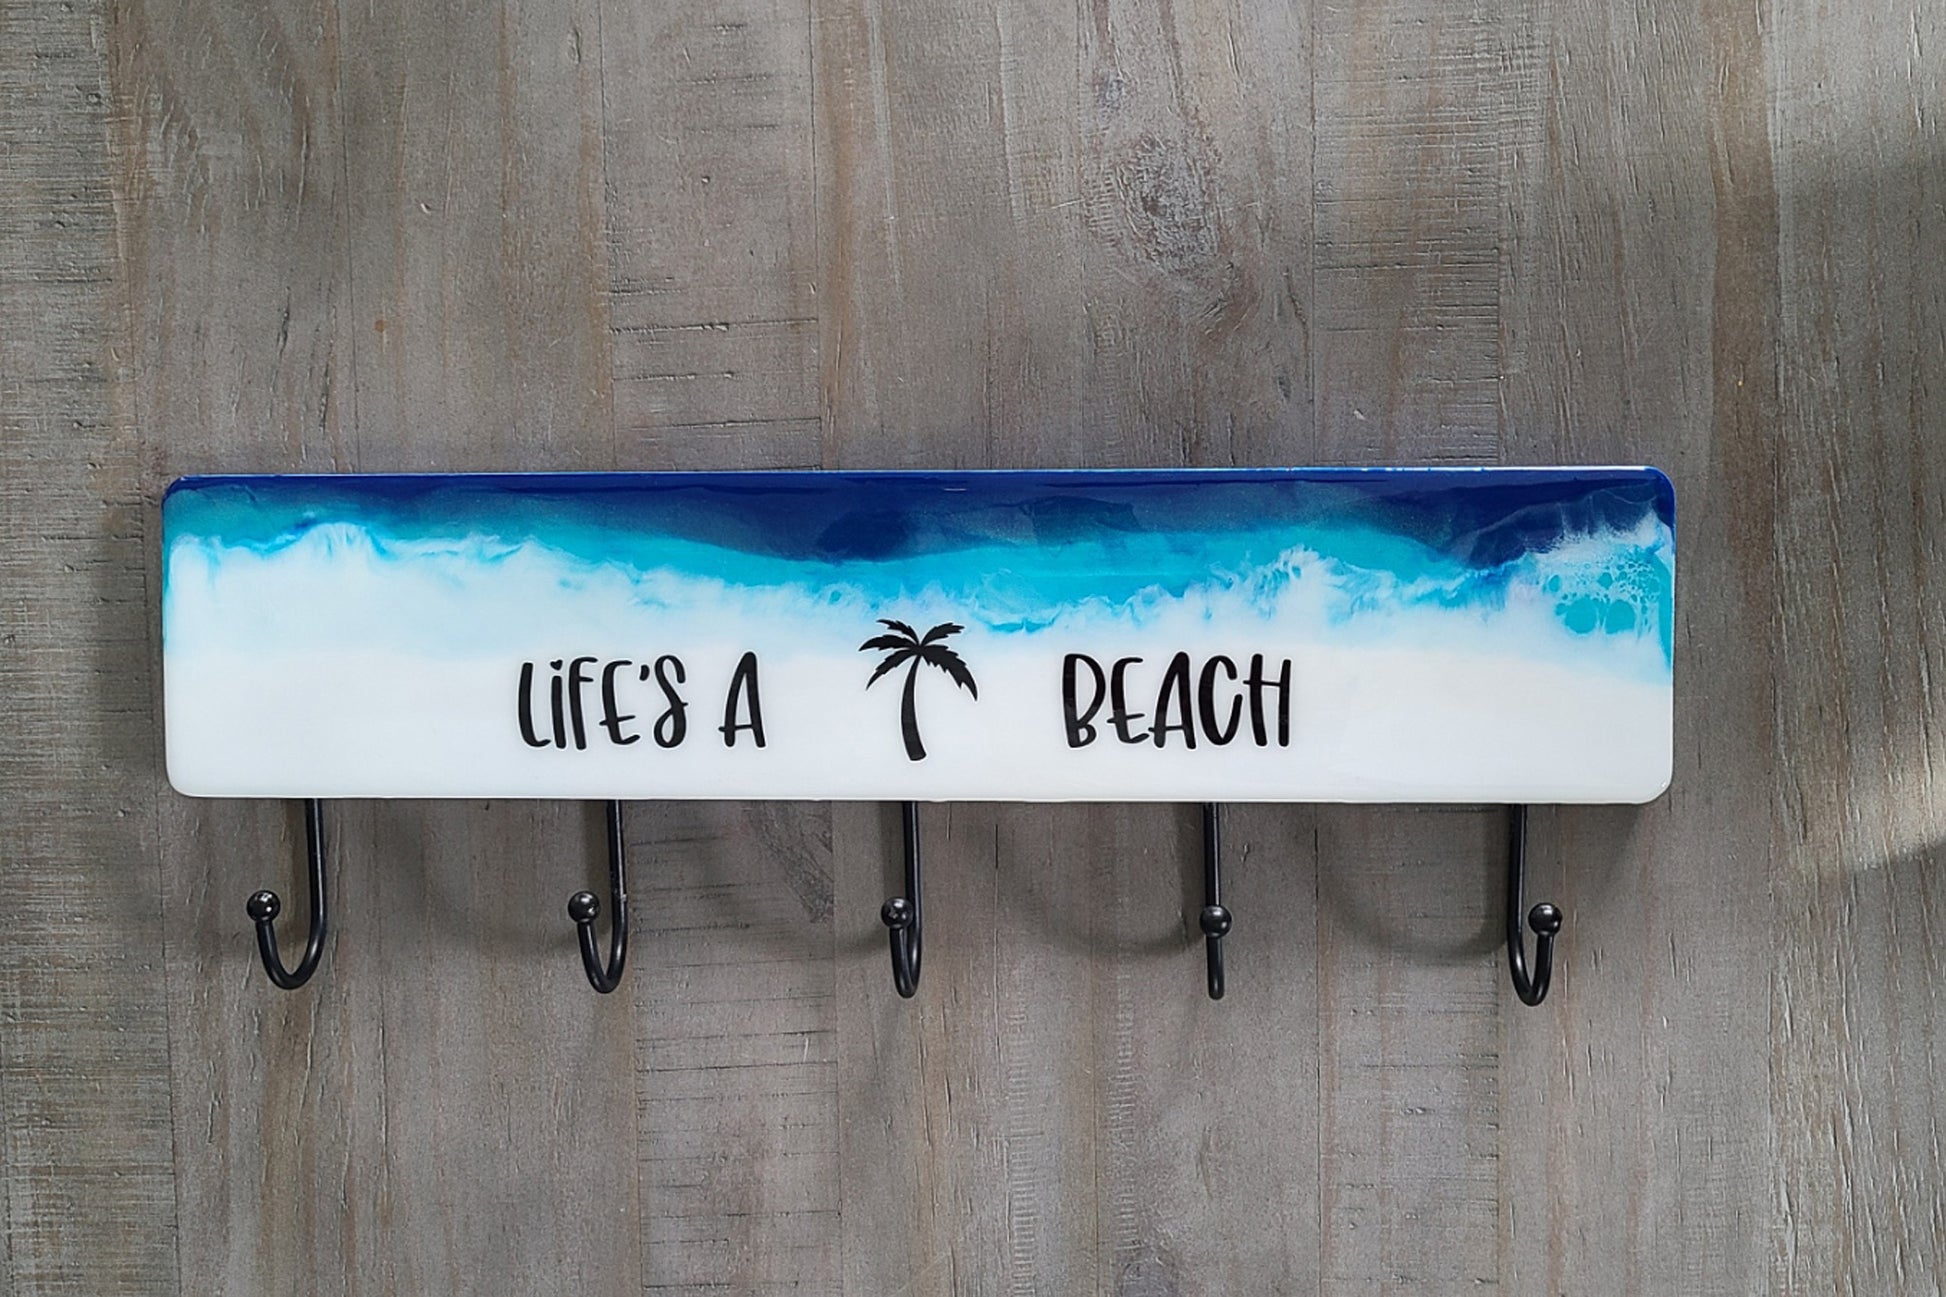 I used resin to create this beach and water scene, lots of sparkle if you look closely.  White waves crash over the colorful water.  LIfe's A Beach With Palm Tree.  A clear coat of resin was poured over the words so that they will not peel off.  Lightweight wood  Resin is UV resistant.  Metal hooks for hanging towels, kid's clothes, leashes or hats.  Approximate size: Wood: 18 x 4 inches; hooks add another 2.5 inches.  Key Holes on back for hanging.